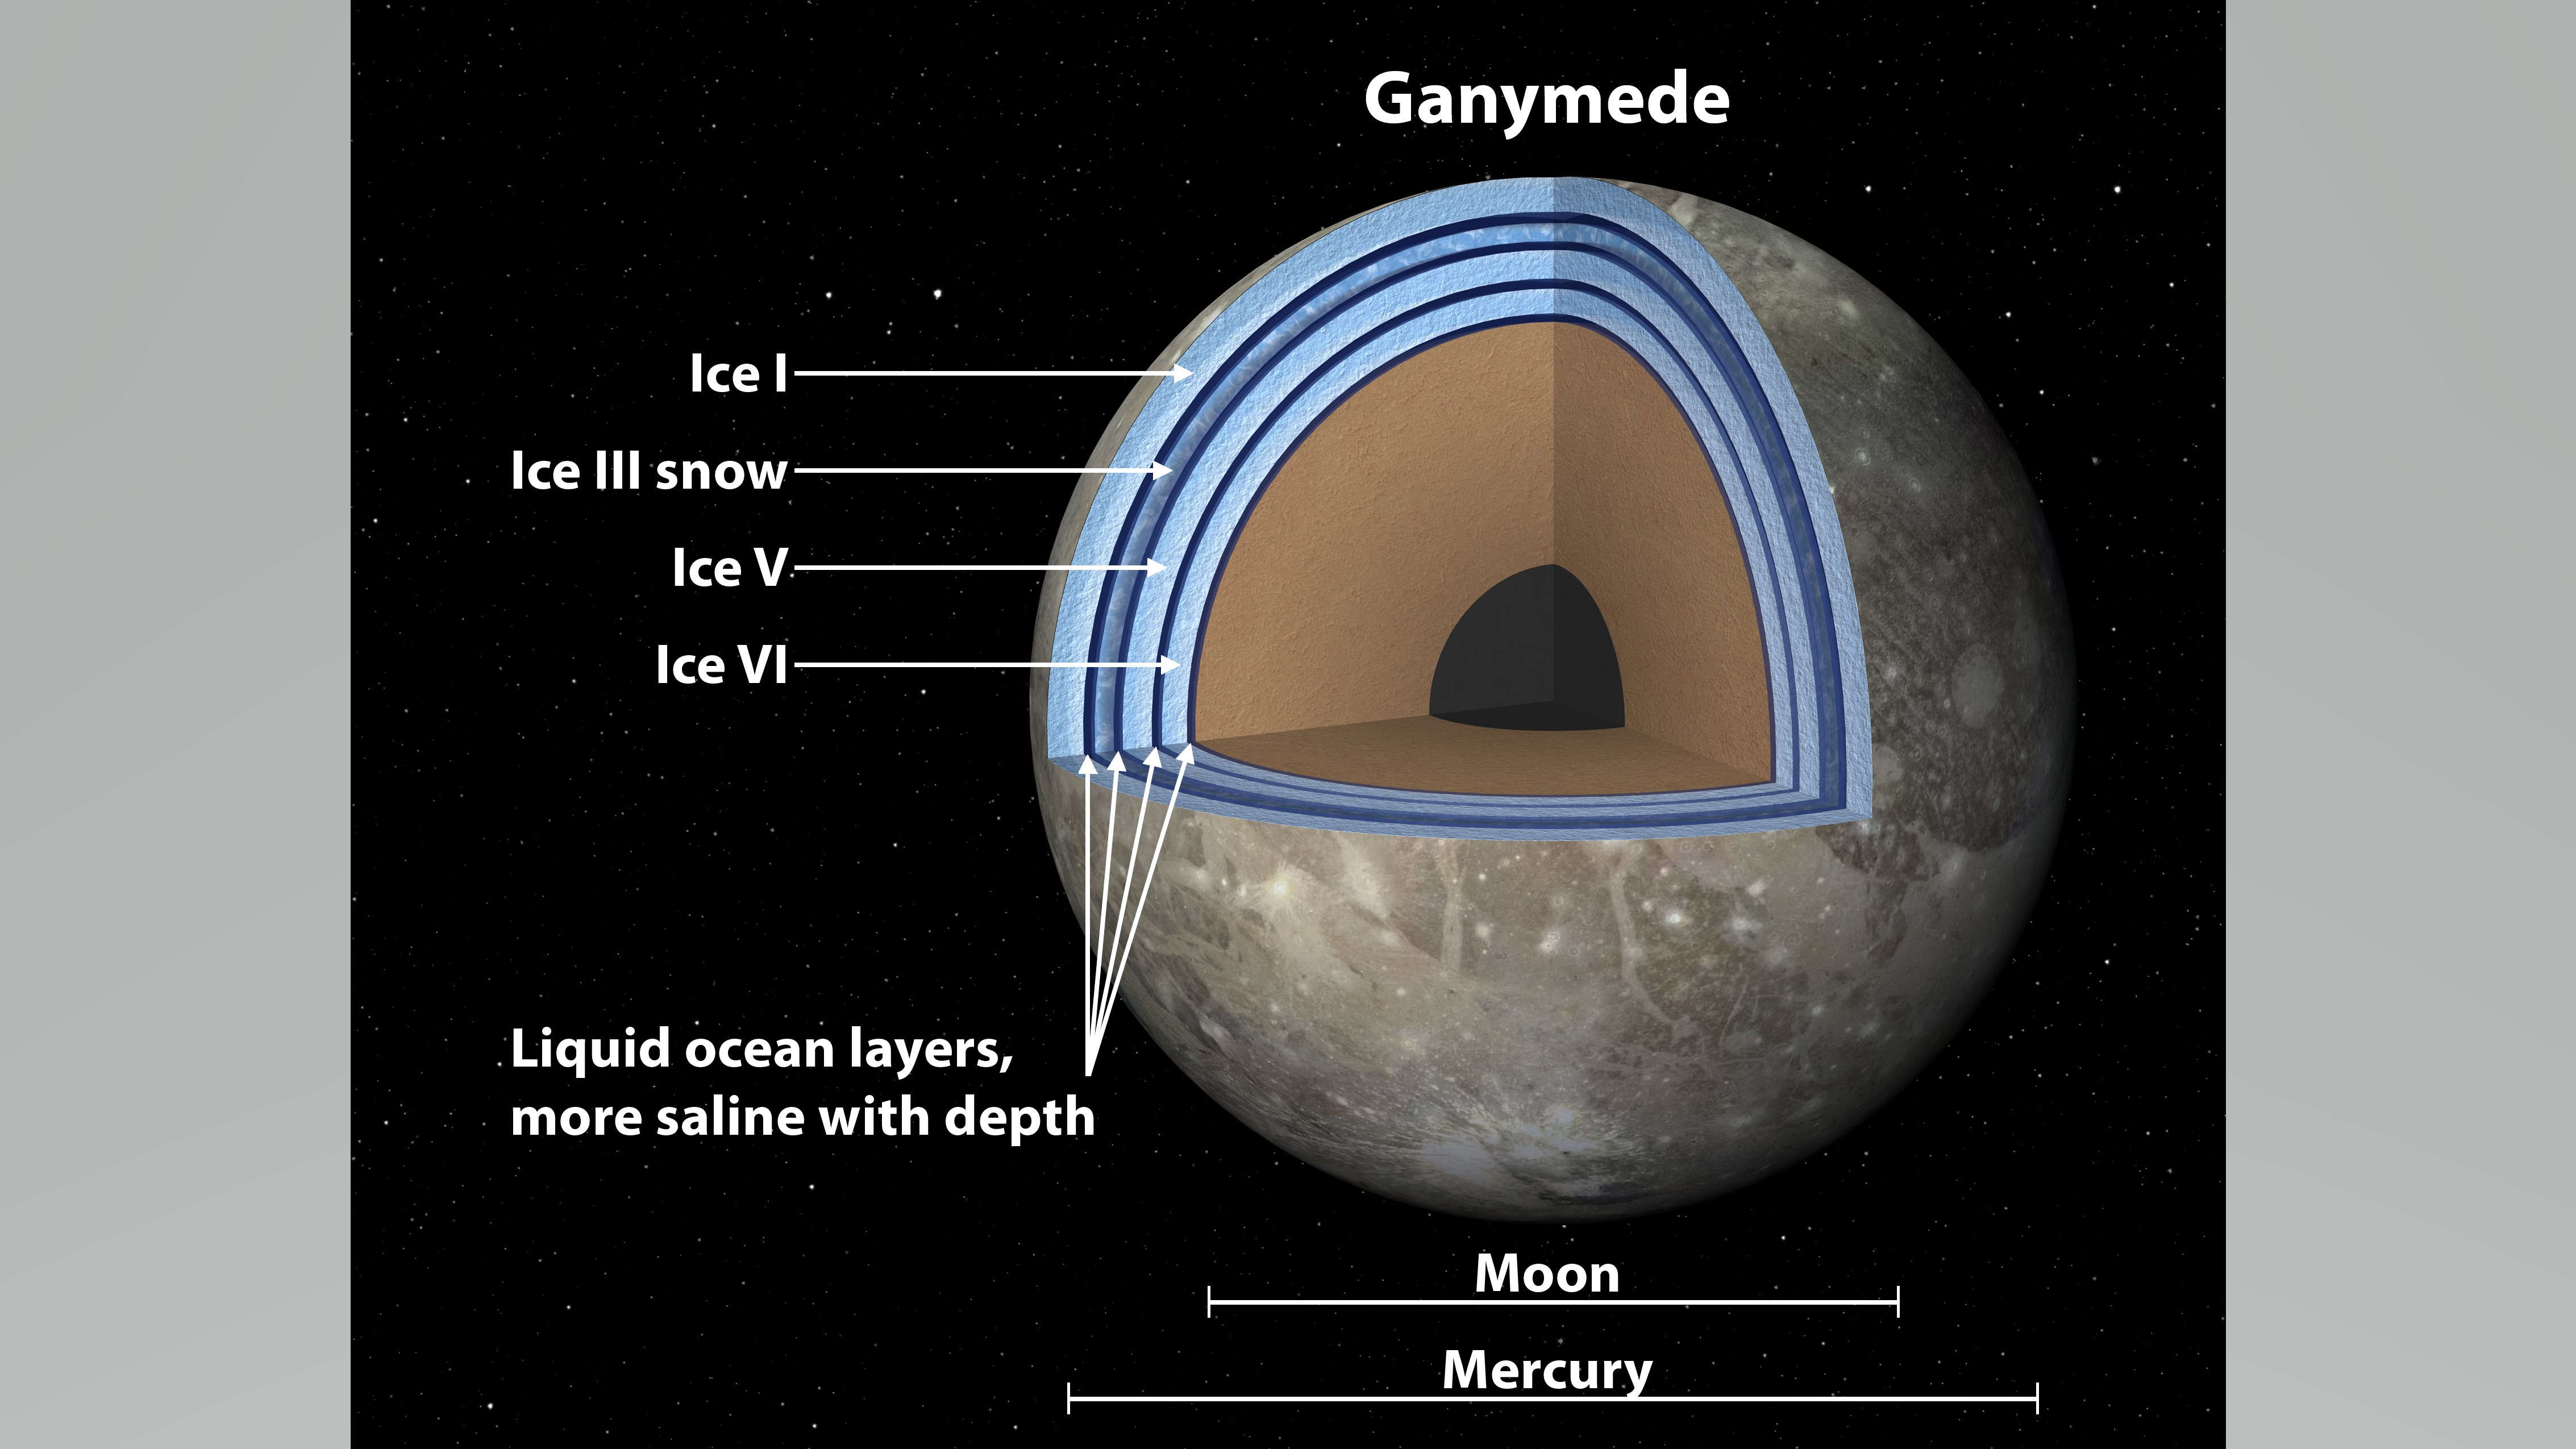 A cutaway of Jupiter's moon Ganymede, showing the various layers of high-pressure ices inside.